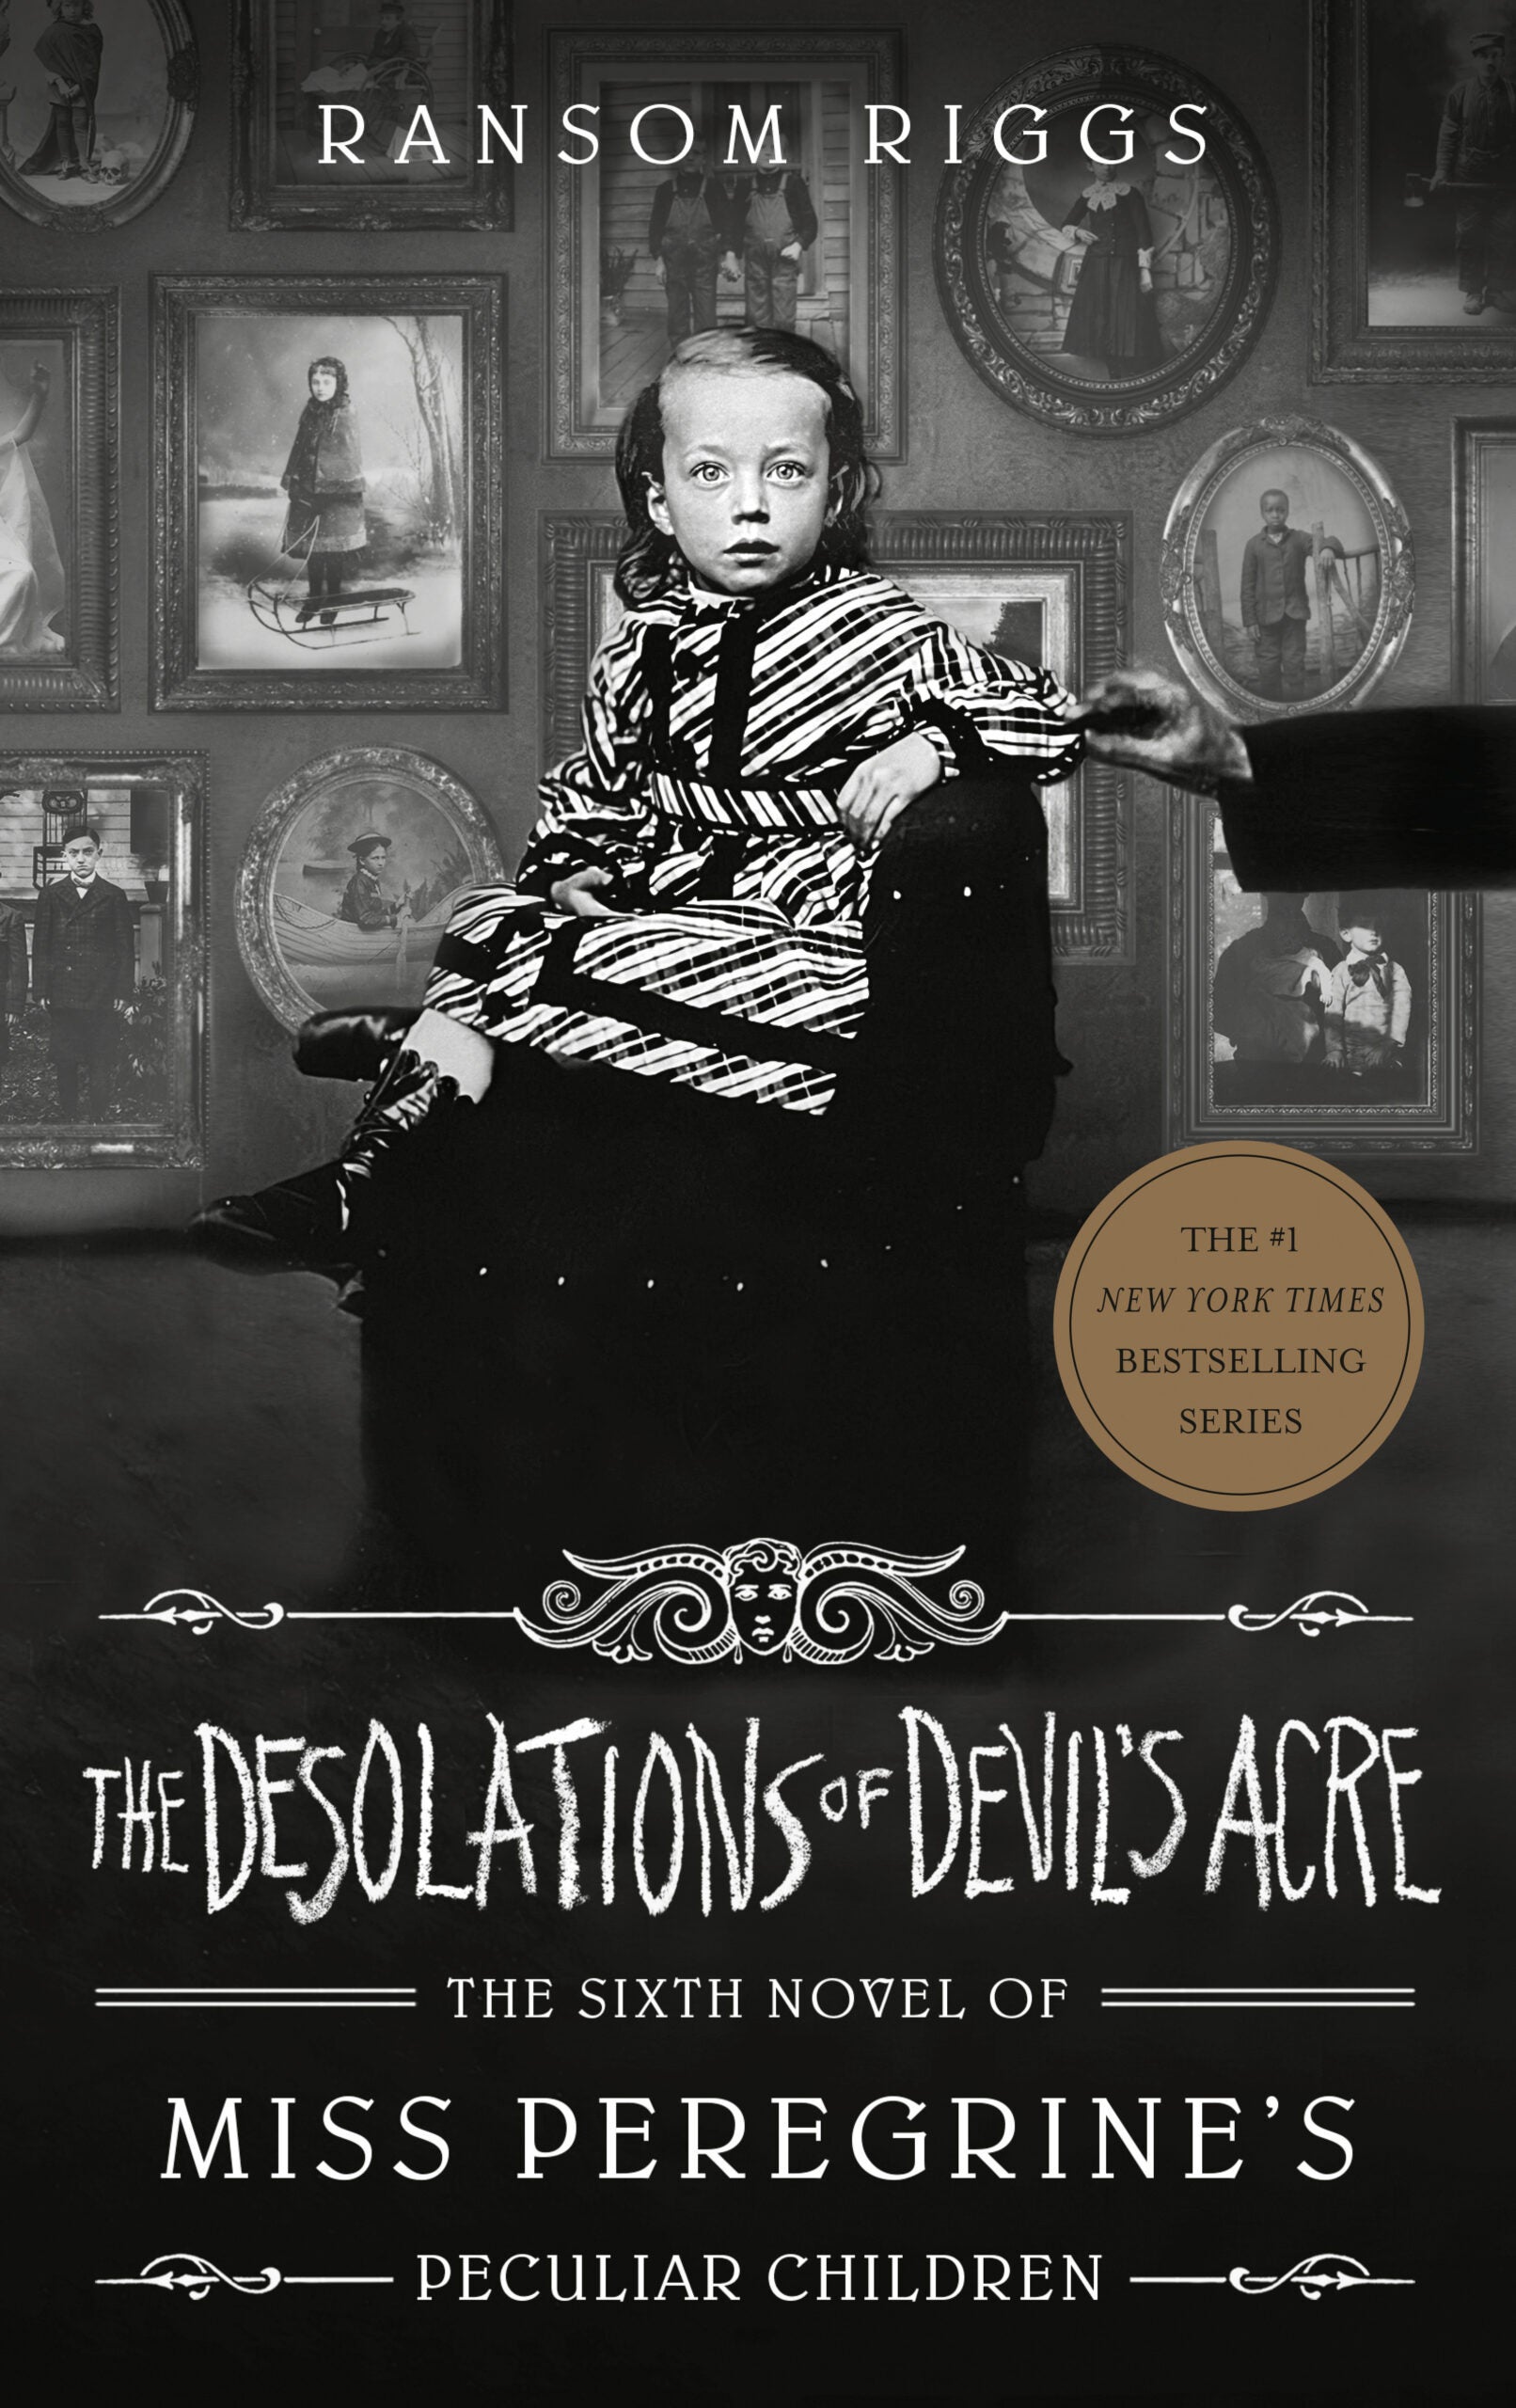 THE DESOLATIONS OF DEVIL’S ACRE by Ransom Riggs is Coming February, 2021!